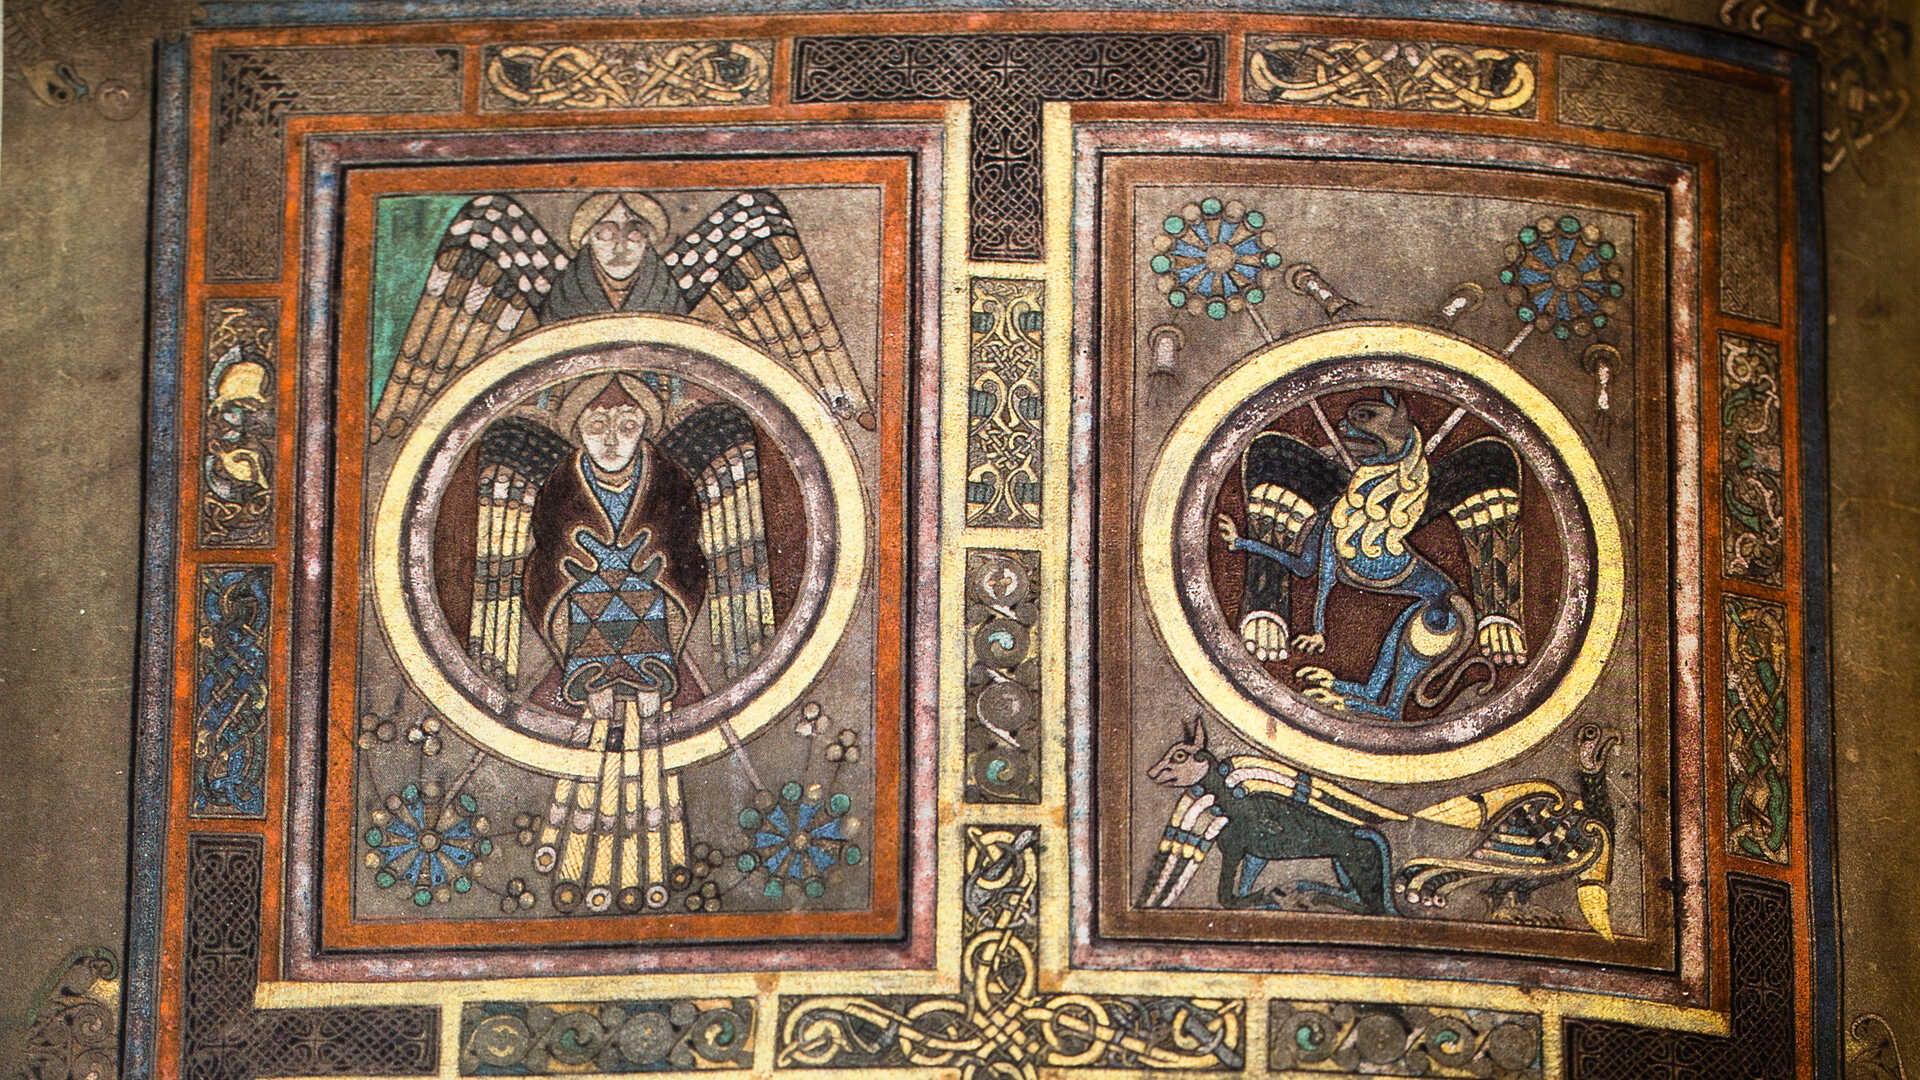 Details from the Book of Kells